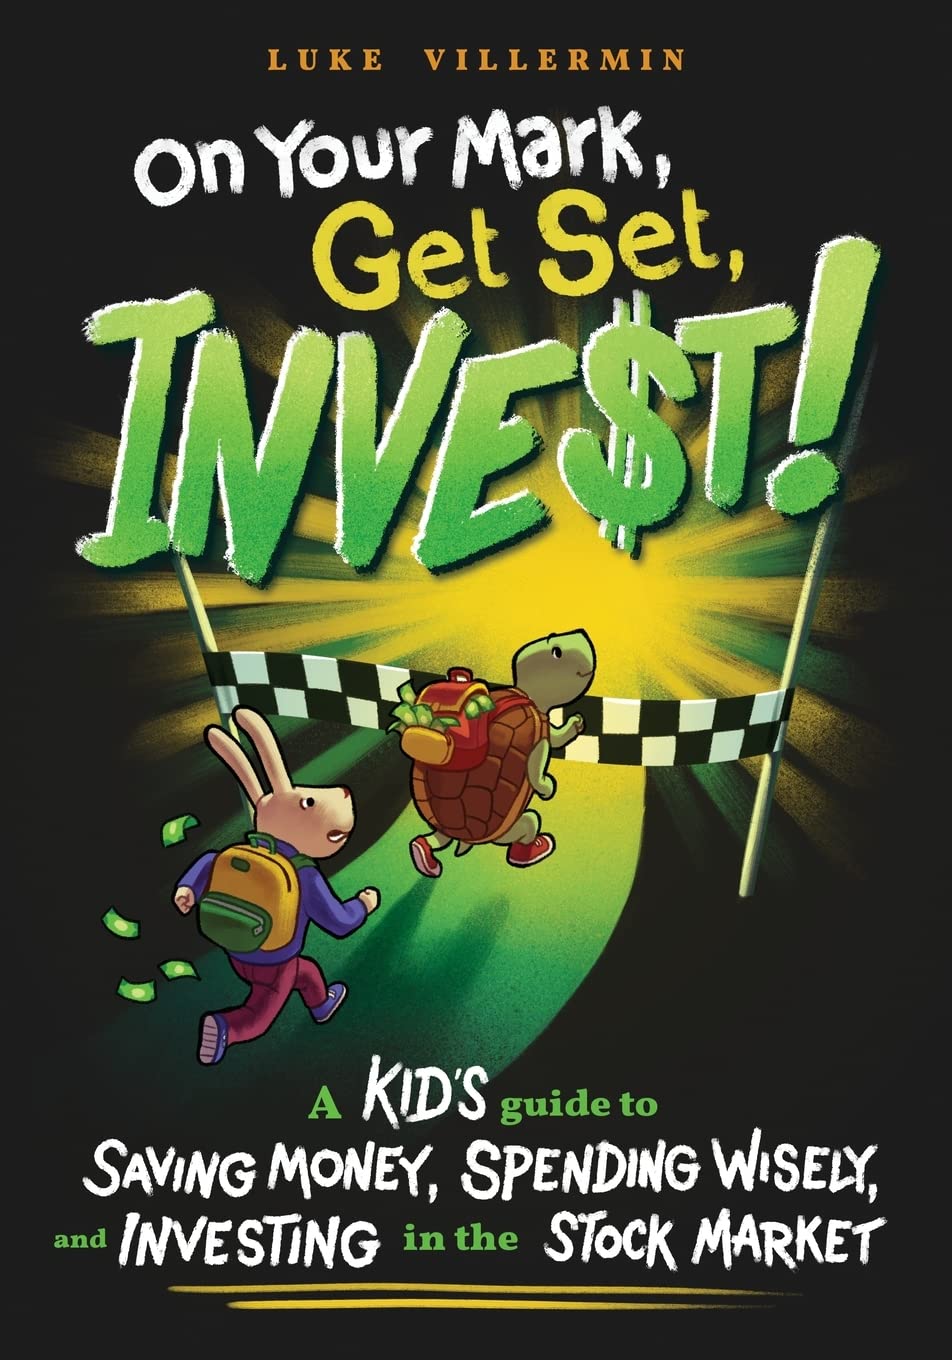 On Your Mark, Get Set, INVEST: A Kid's Guide to Saving Money, Spending Wisely, and Investing in the Stock Market (Invest Now Play Later Series)